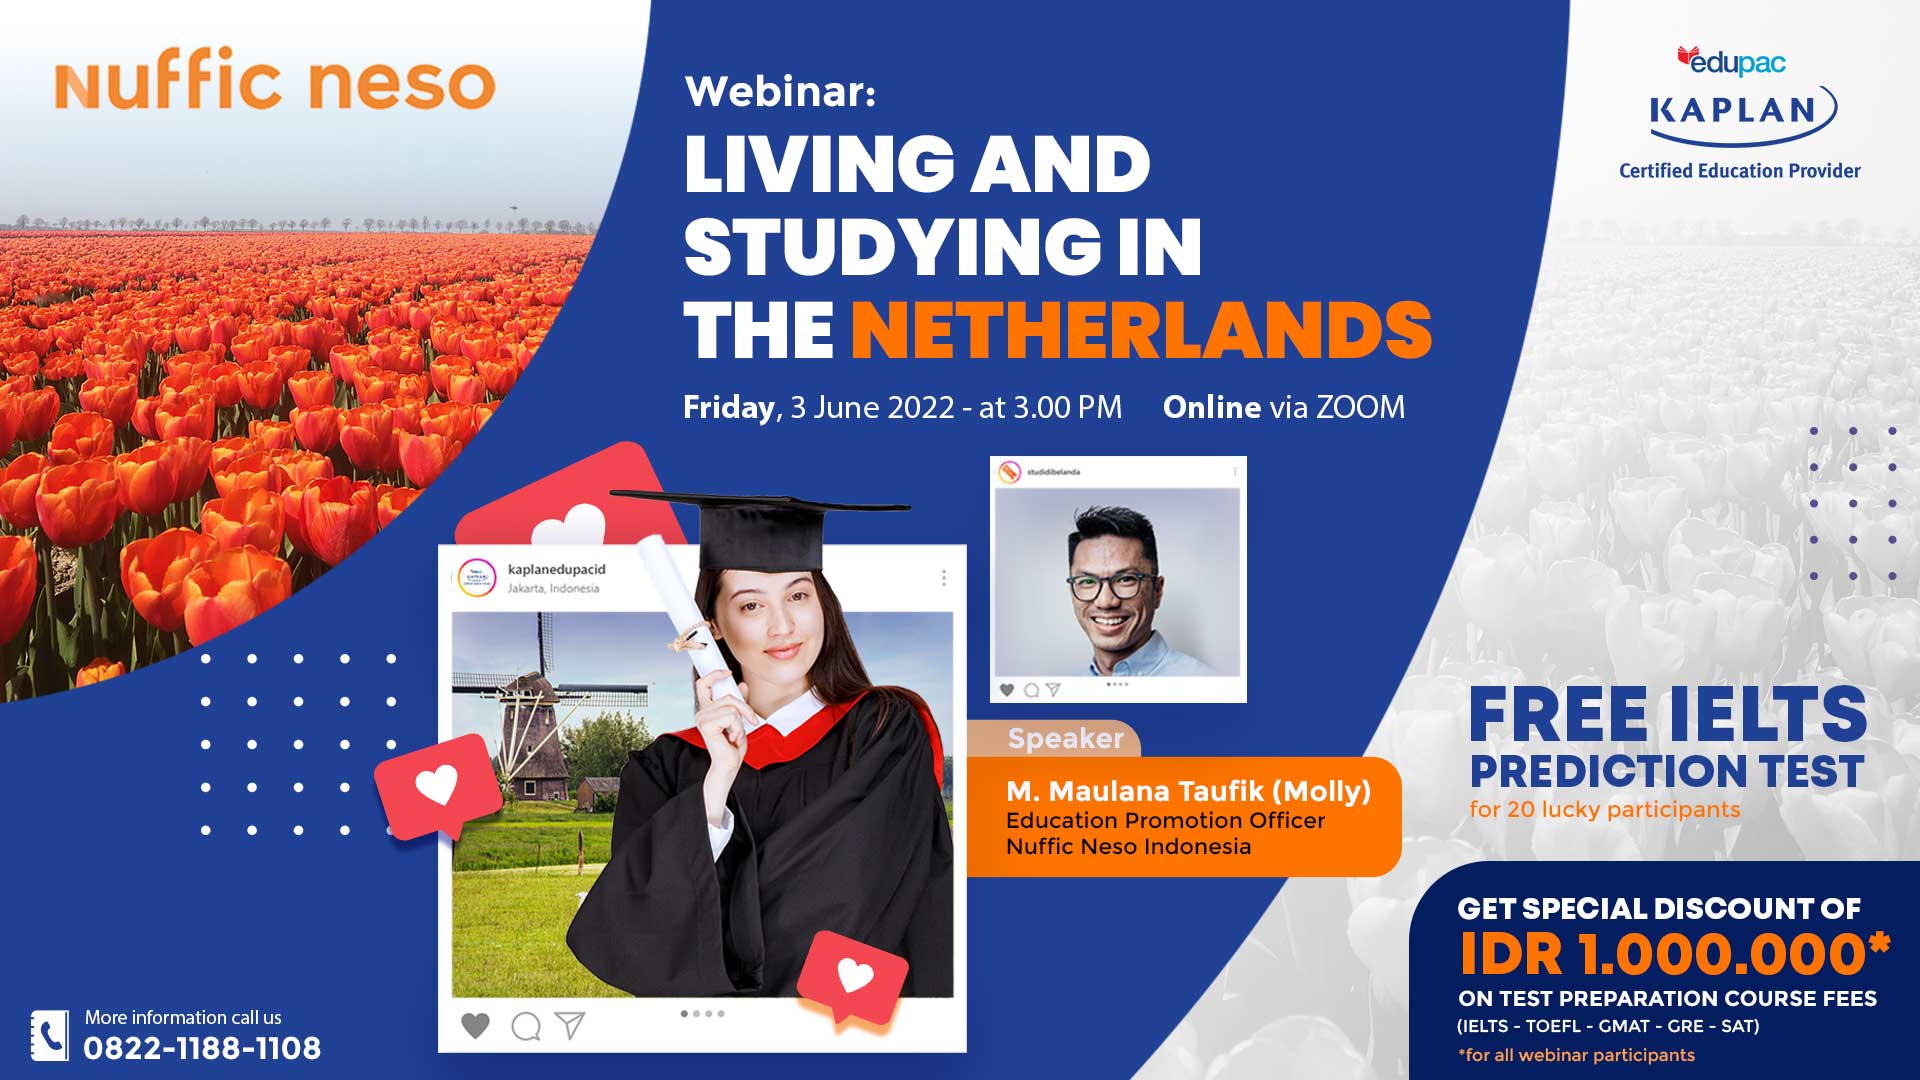 Face to Face (Offline Event) : FREE Webinar "Living and Studying in the Netherlands" 